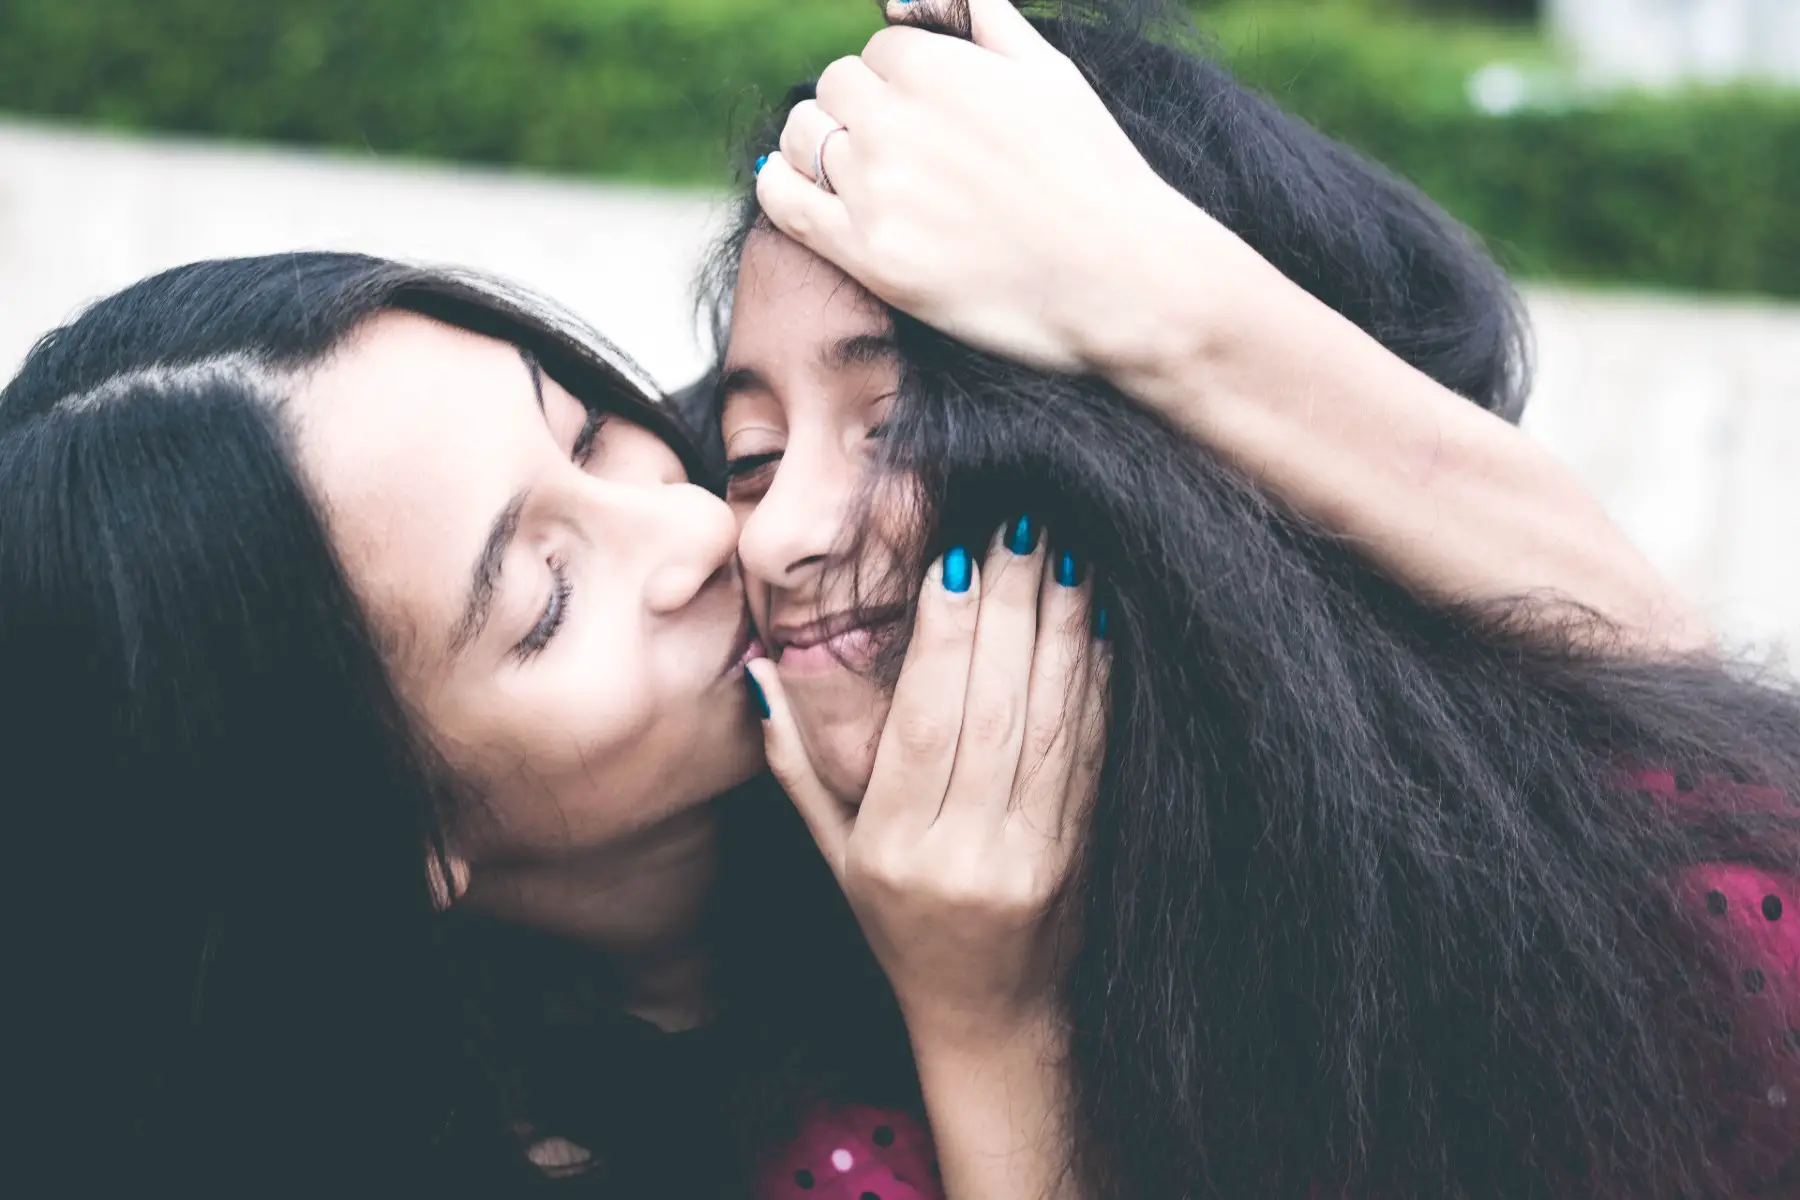 Woman holding girl's face and kissing her cheek.